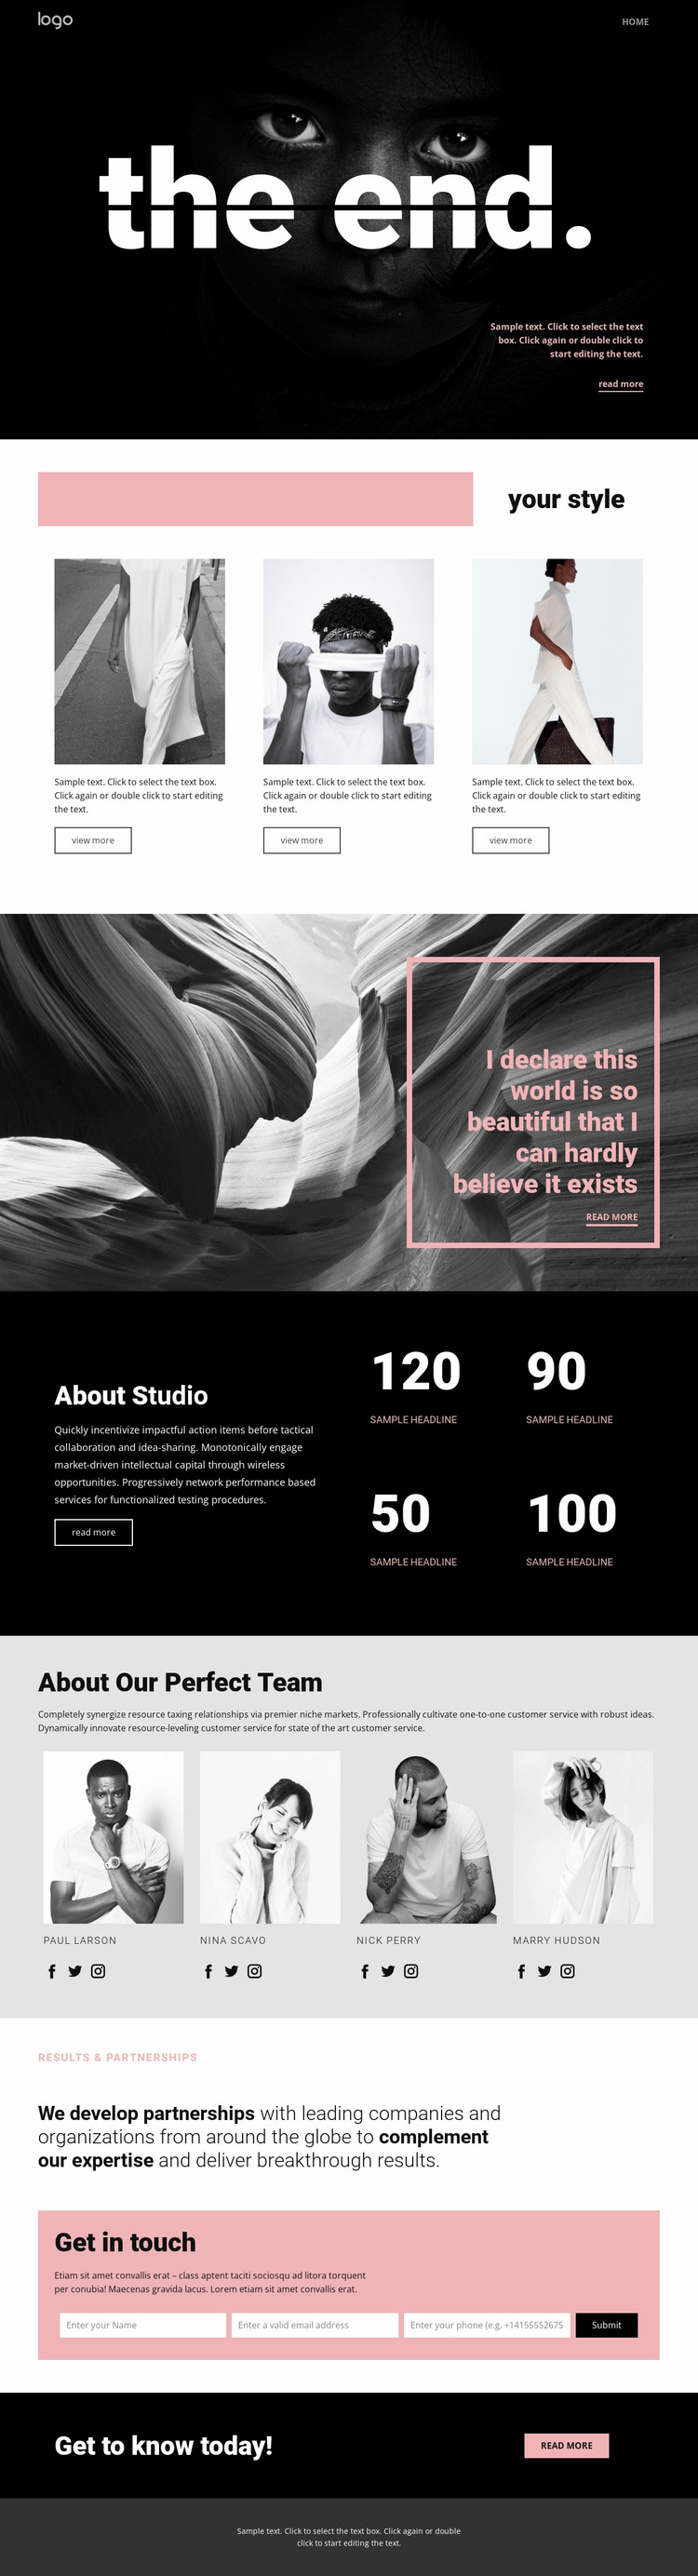 Perfecting styles of art Website Builder Templates